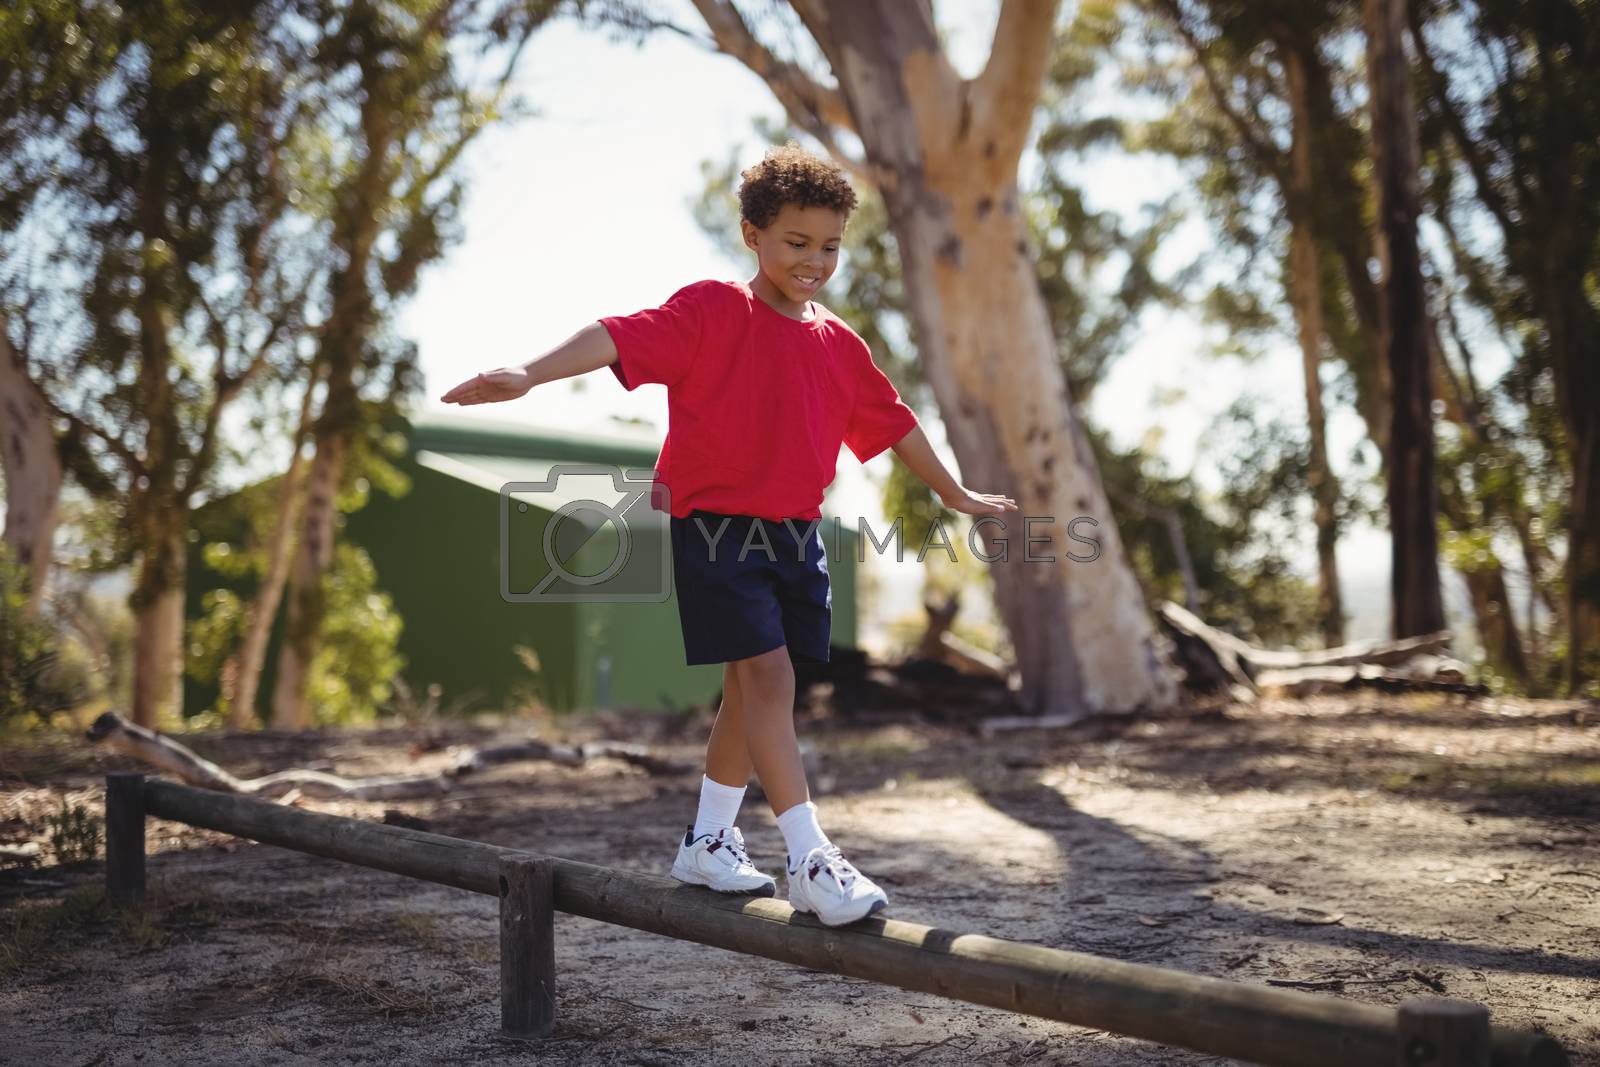 Royalty free image of Happy boy exercising on obstacle during obstacle course by Wavebreakmedia